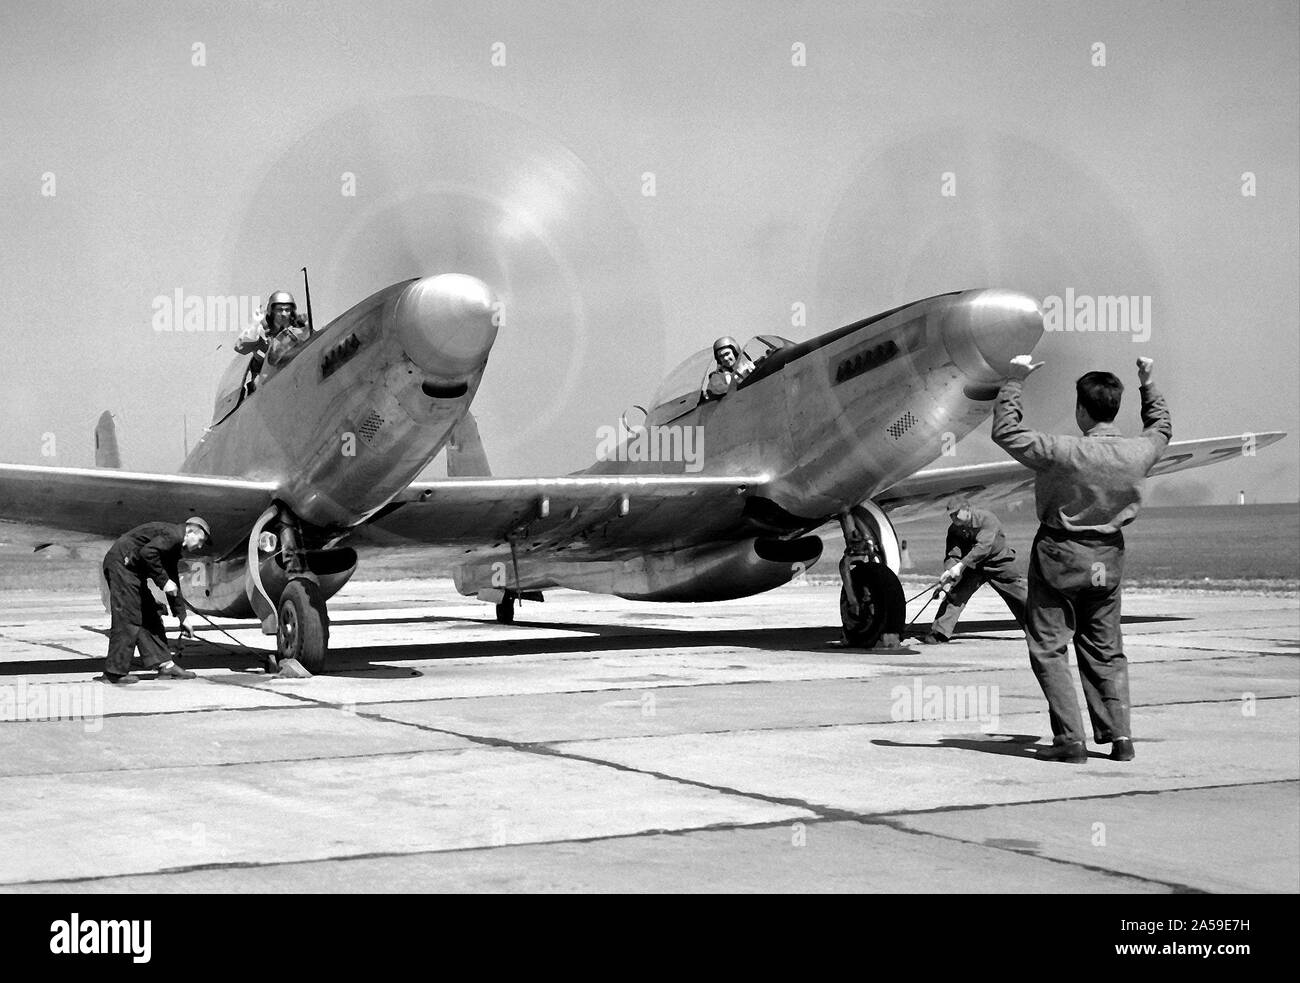 Pilot William Swann, right cockpit, prepares the North American XF-82 Twin Mustang for flight at the National Advisory Committee for Aeronautics (NACA) Lewis Flight Propulsion Laboratory. Stock Photo